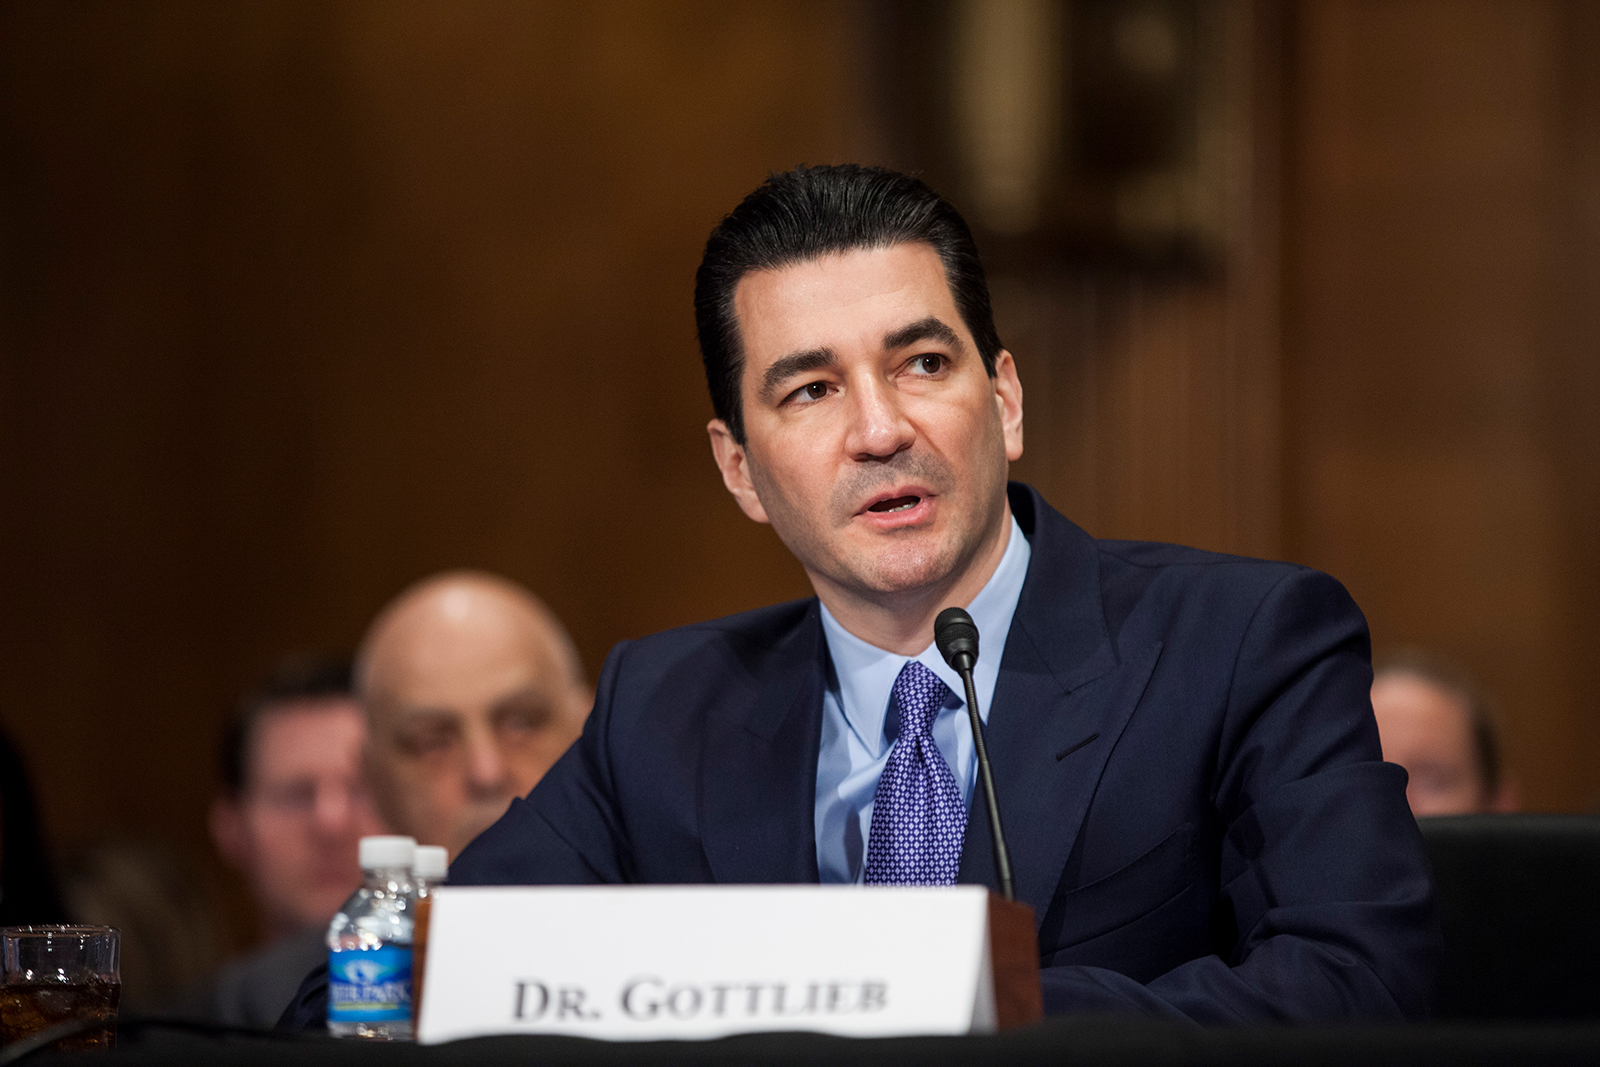 Dr. Scott Gottlieb, then FDA Commissioner-designate, testifies during a Senate Health, Education, Labor and Pensions Committee hearing on Capitol Hill in Washington, DC, on April 5, 2017.